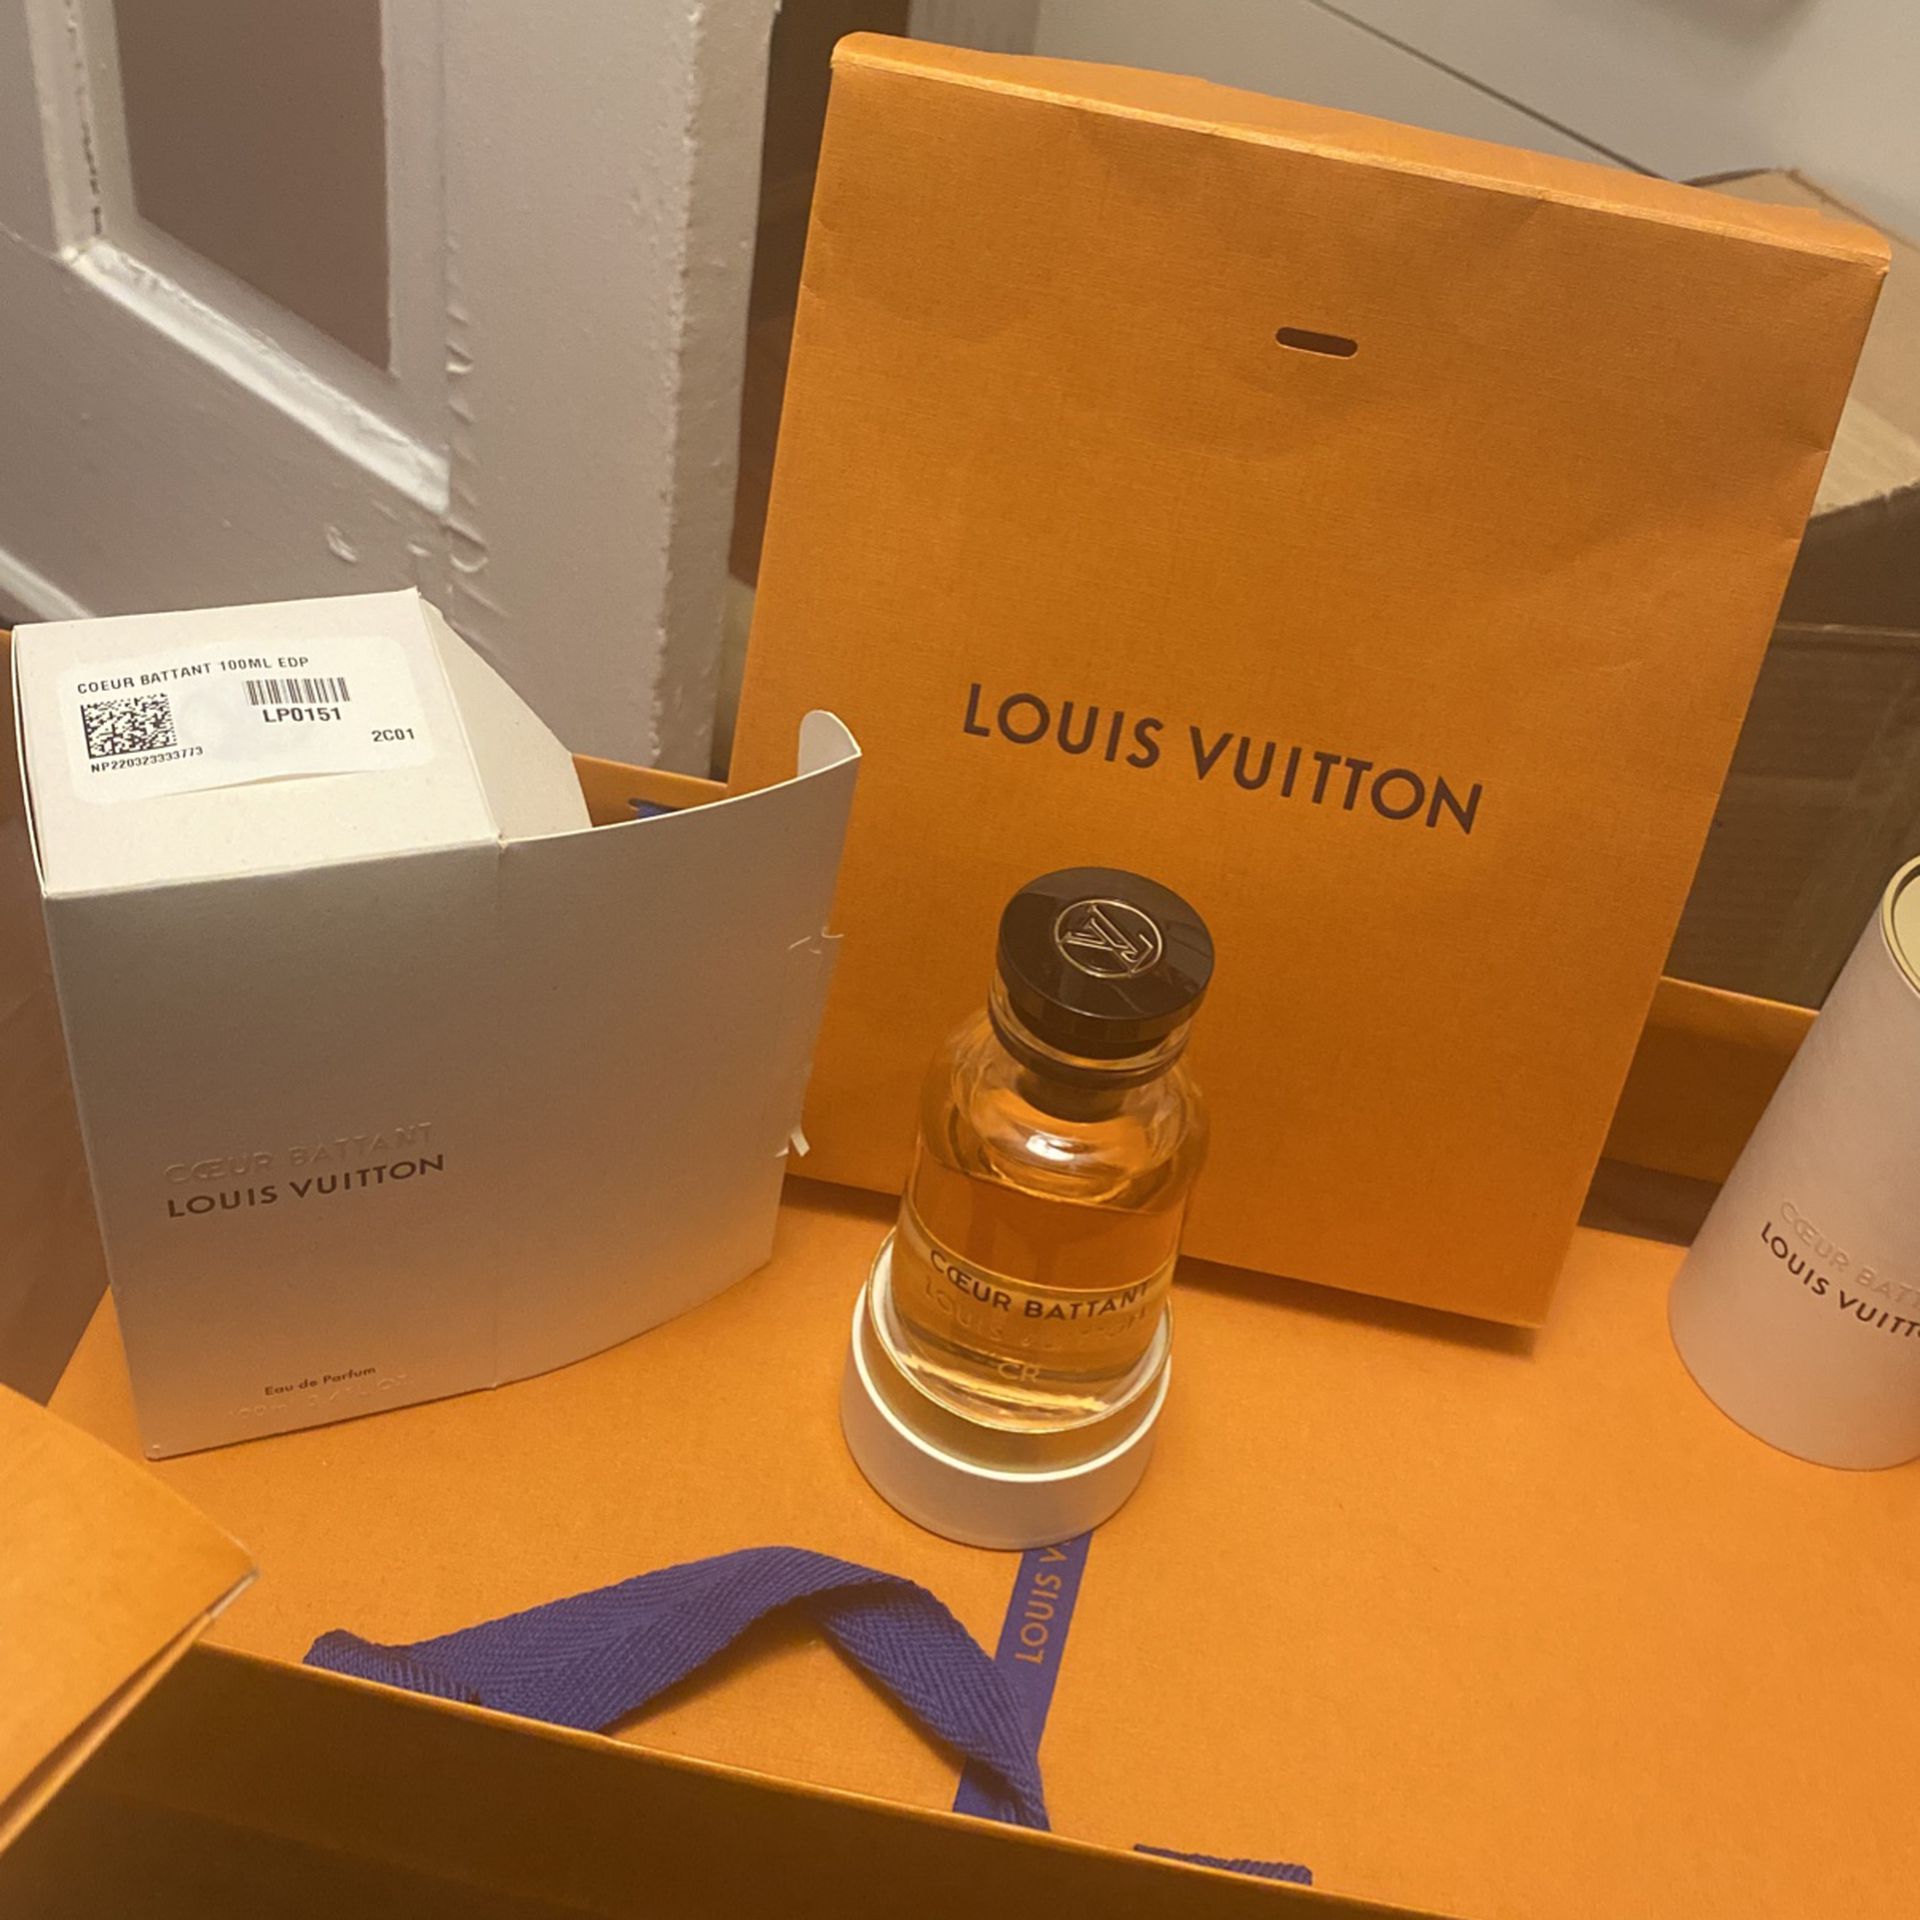 Louis Vuitton perfume original I have the receipt for Sale in